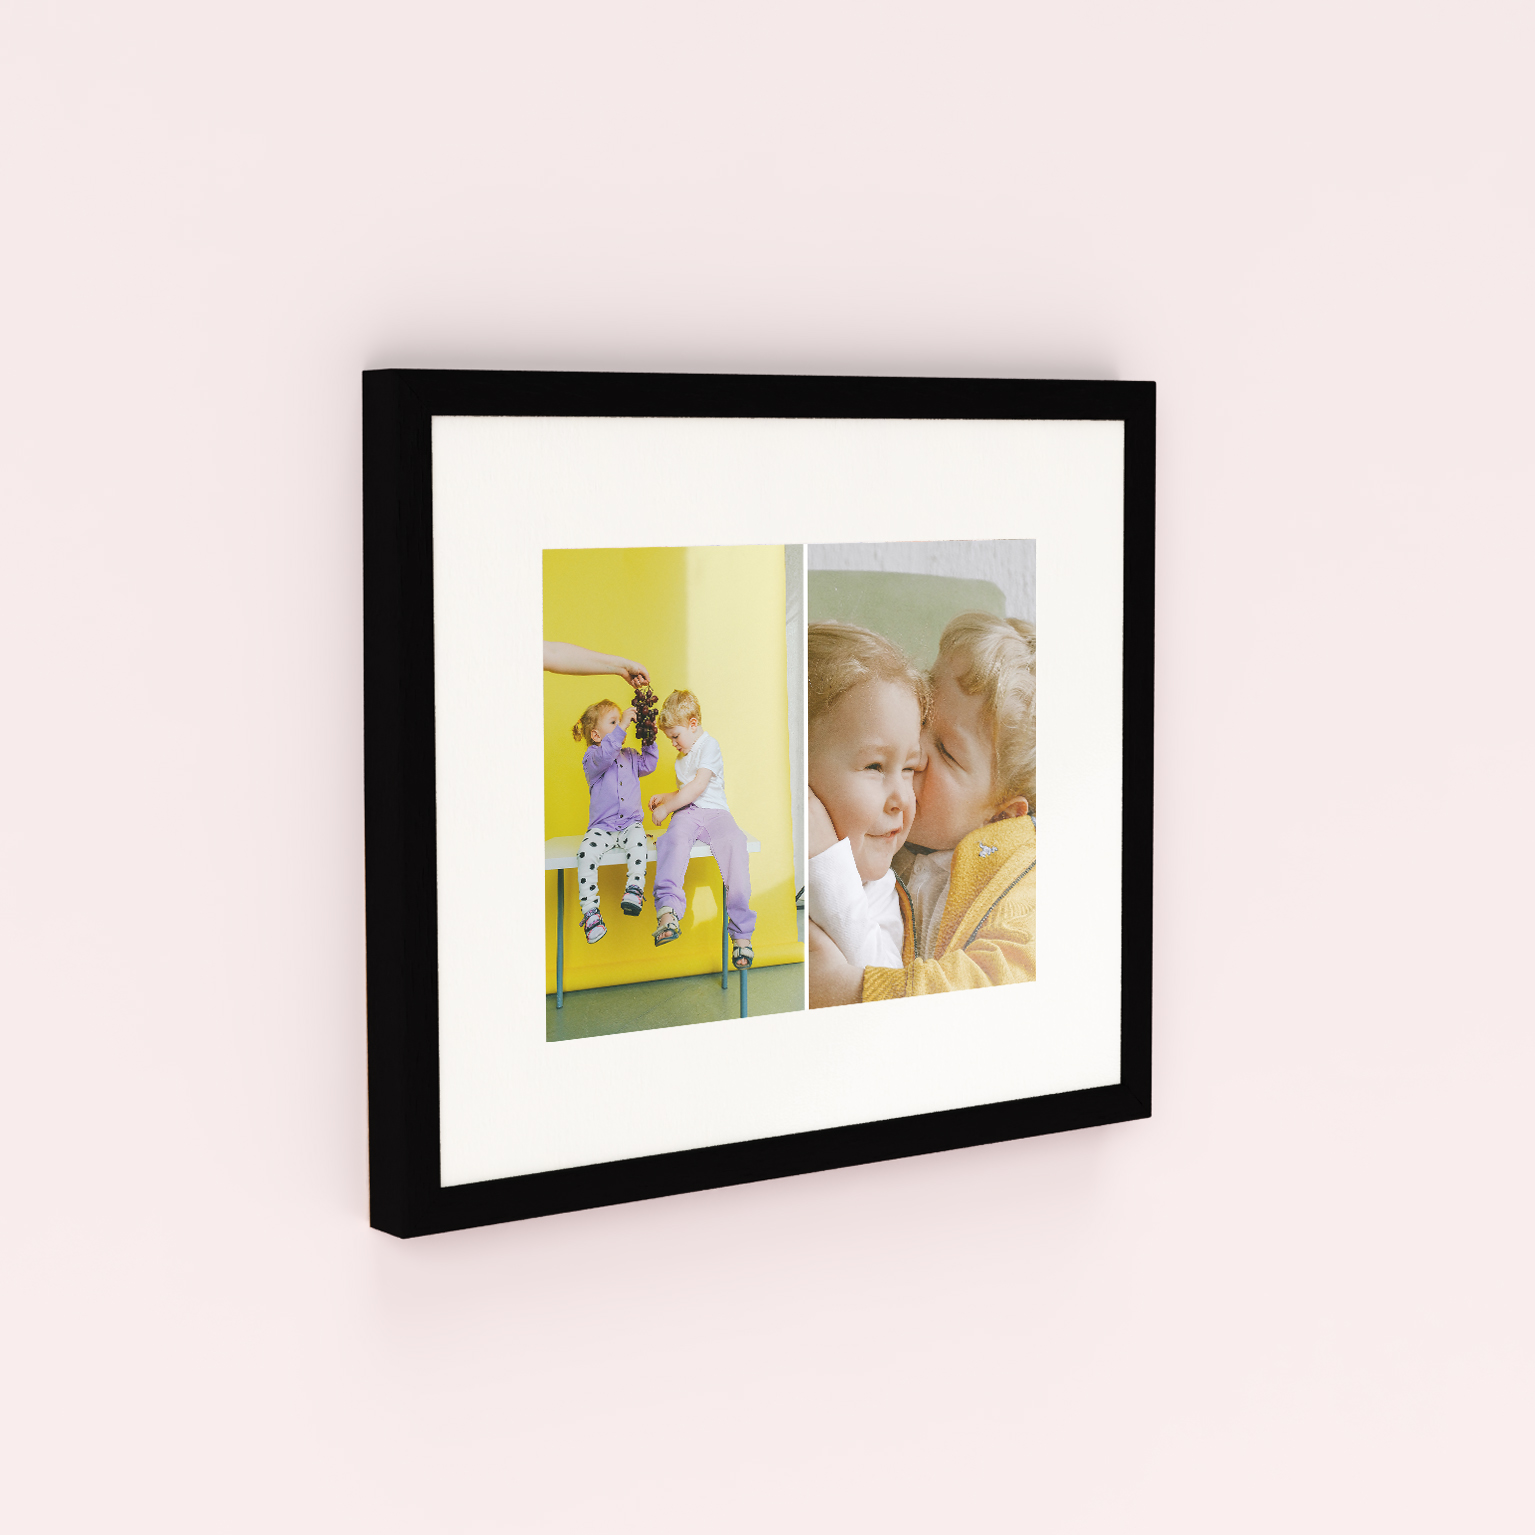 Double Trouble Framed Photo Print - Elevate memories with a sophisticated design showcasing two cherished photos.